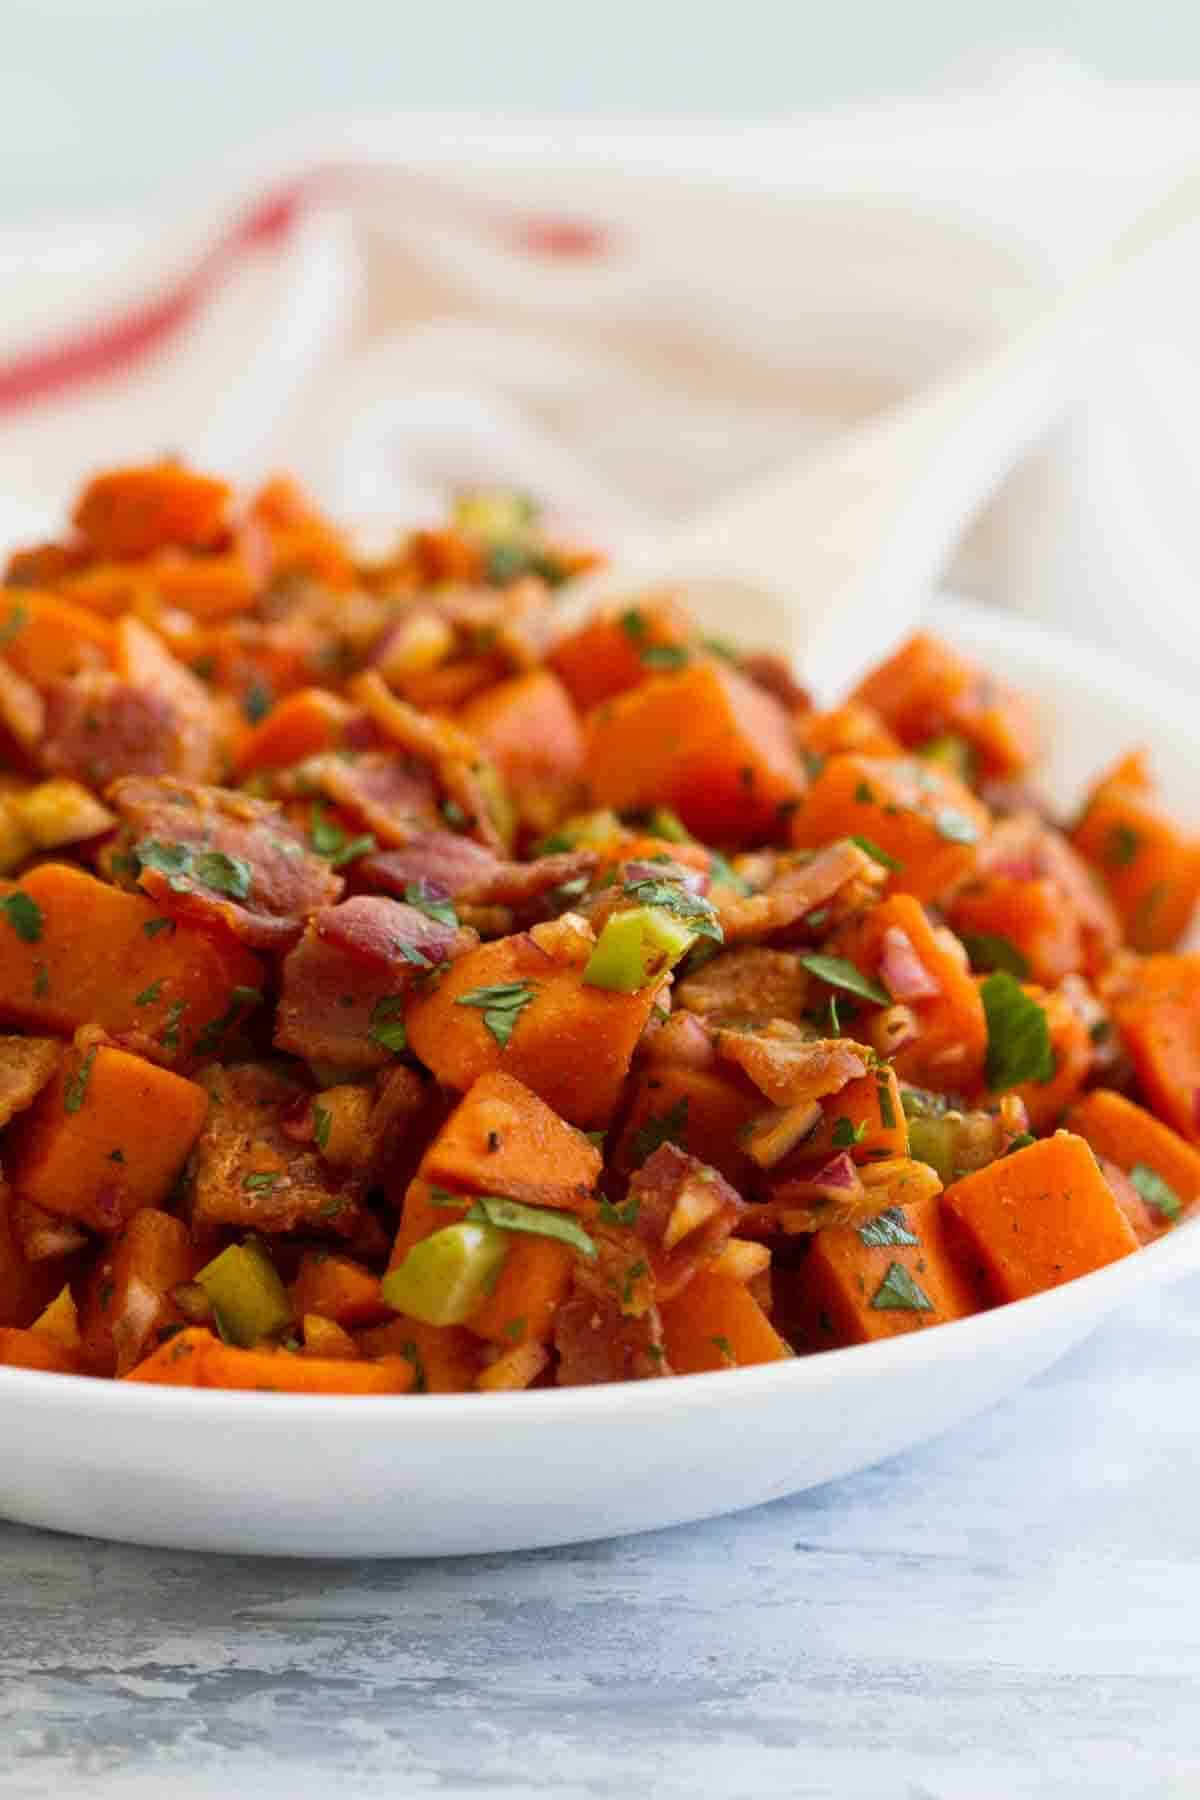 Bowl filled with Sweet Potato Salad with Bacon.